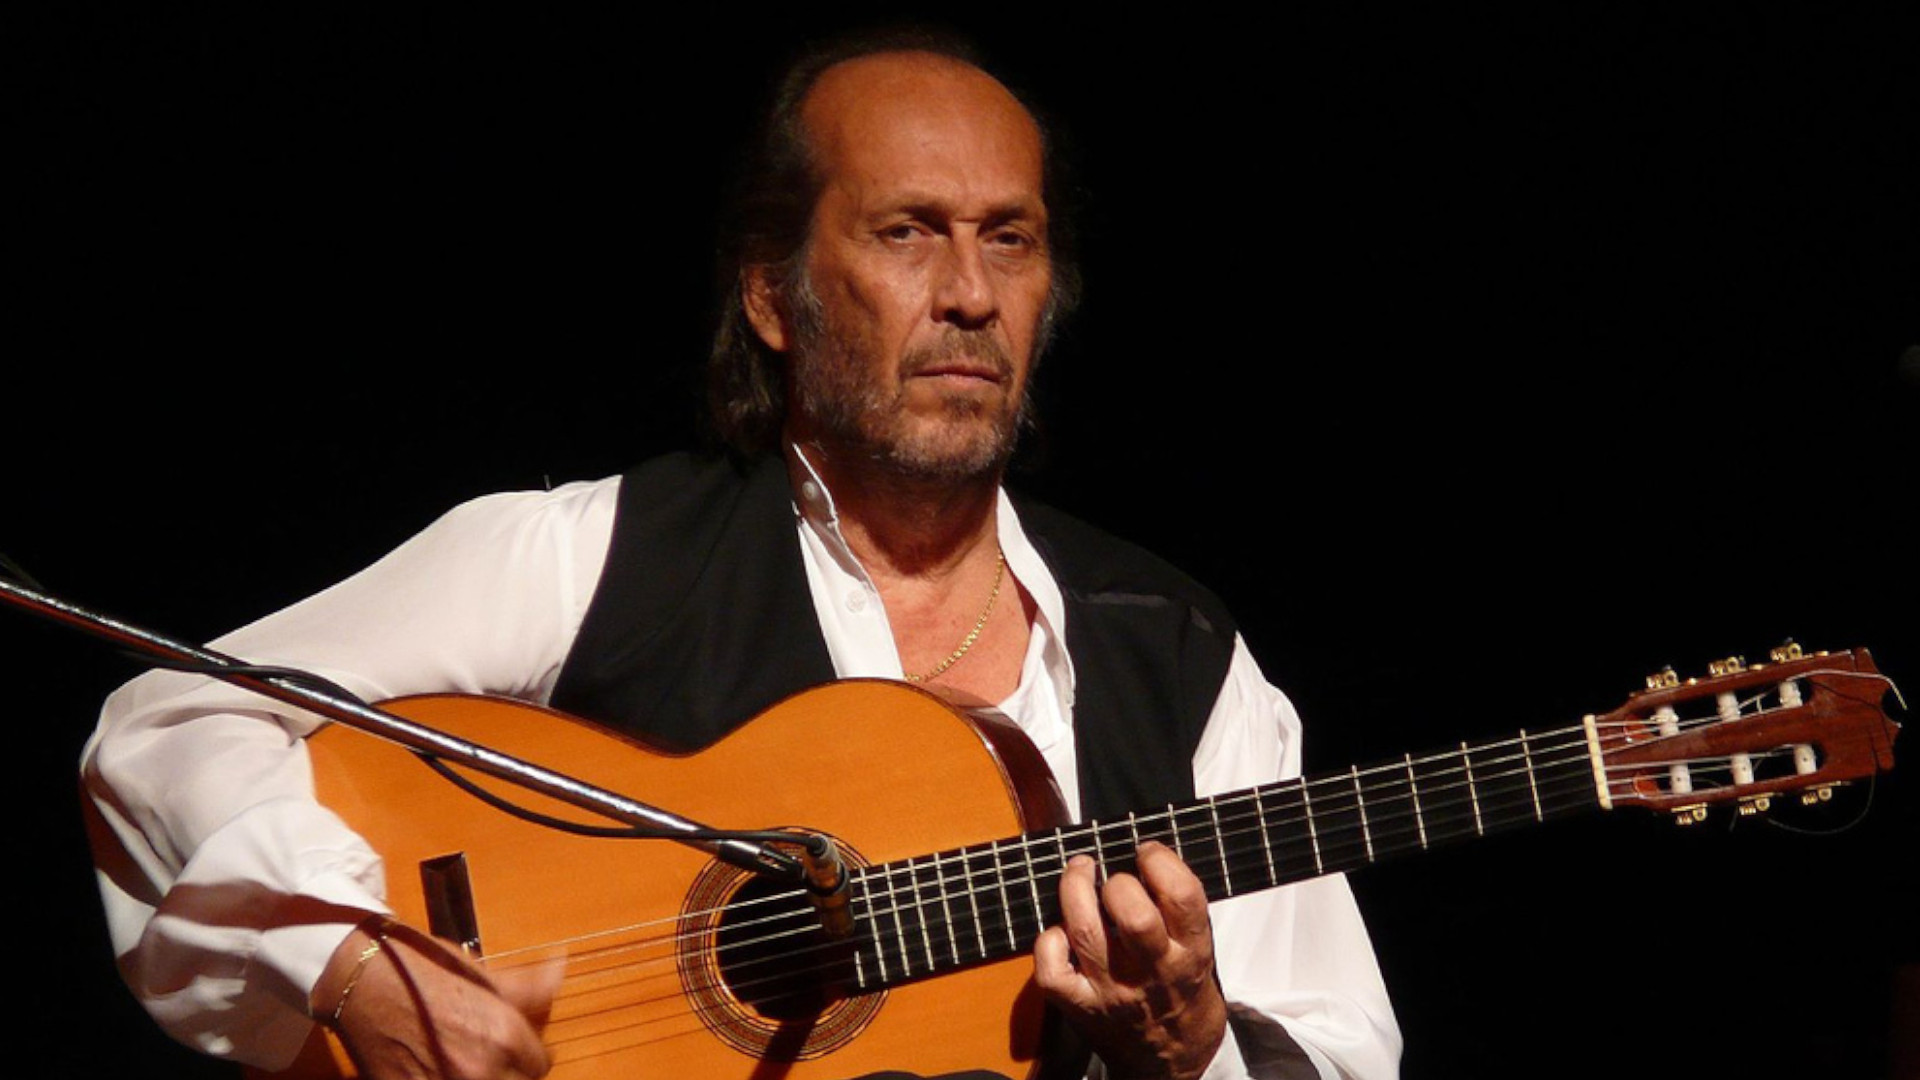 From Andalusia to the shores of the Bosphorus: Paco de Lucia’s influence on Turkish music